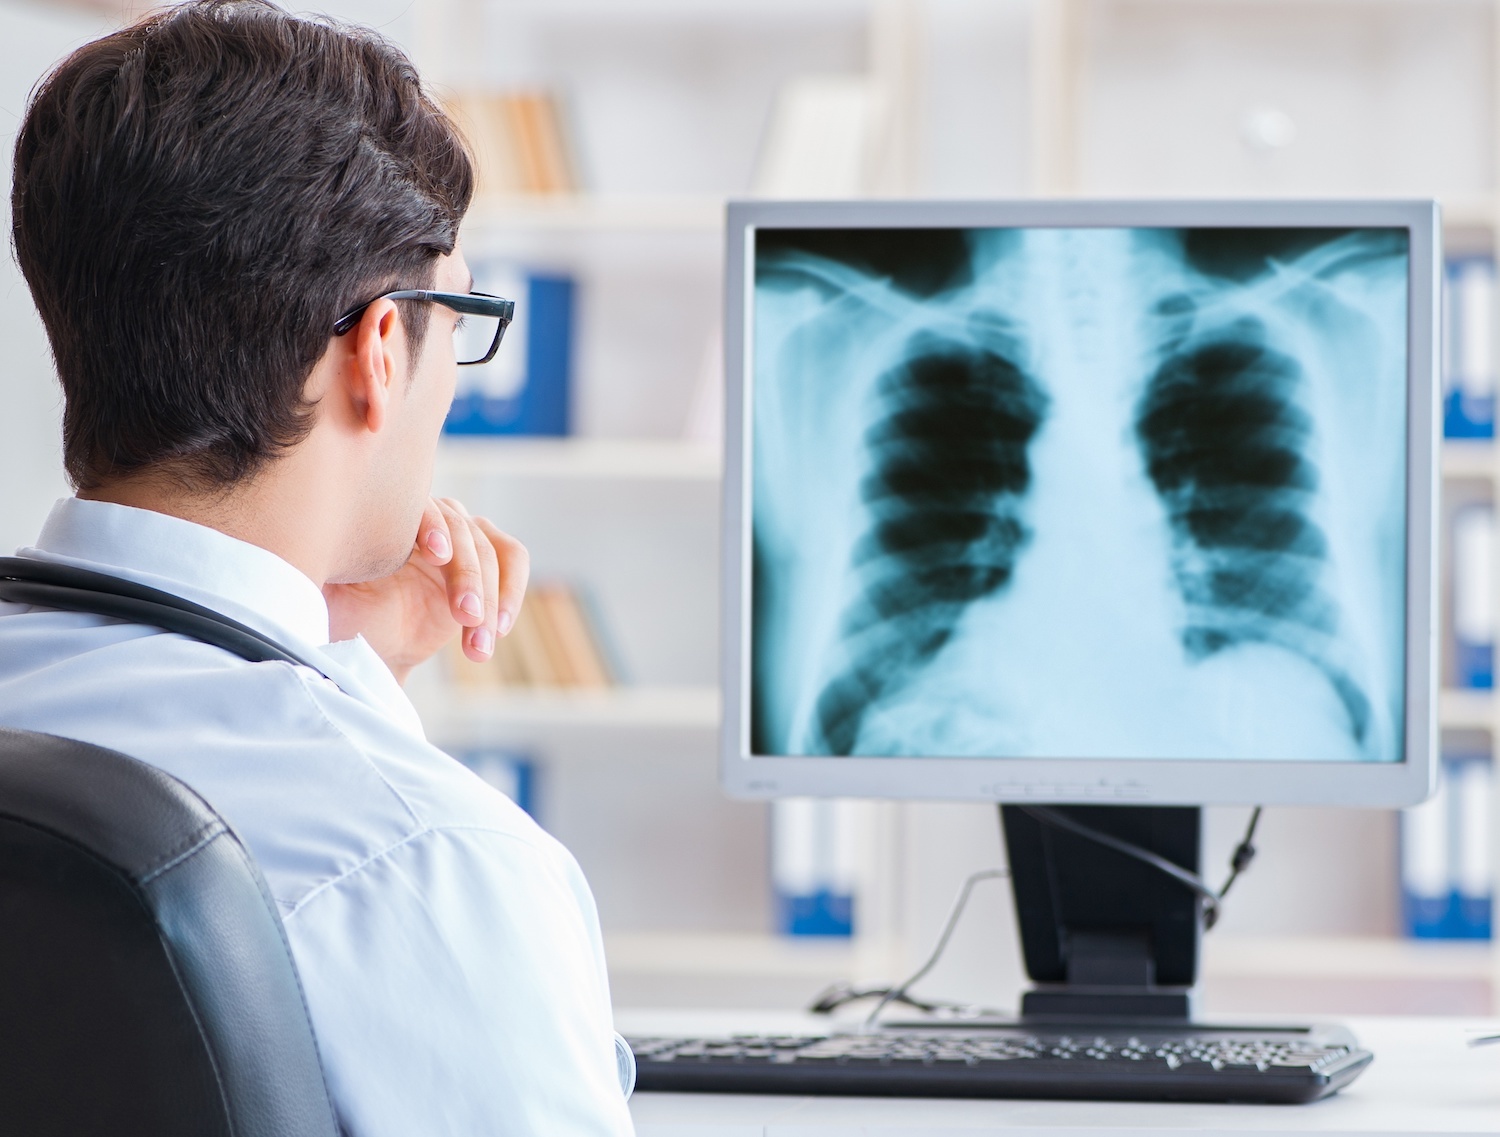 treatment to lung cancer - advanced treatment thanks to cancer research